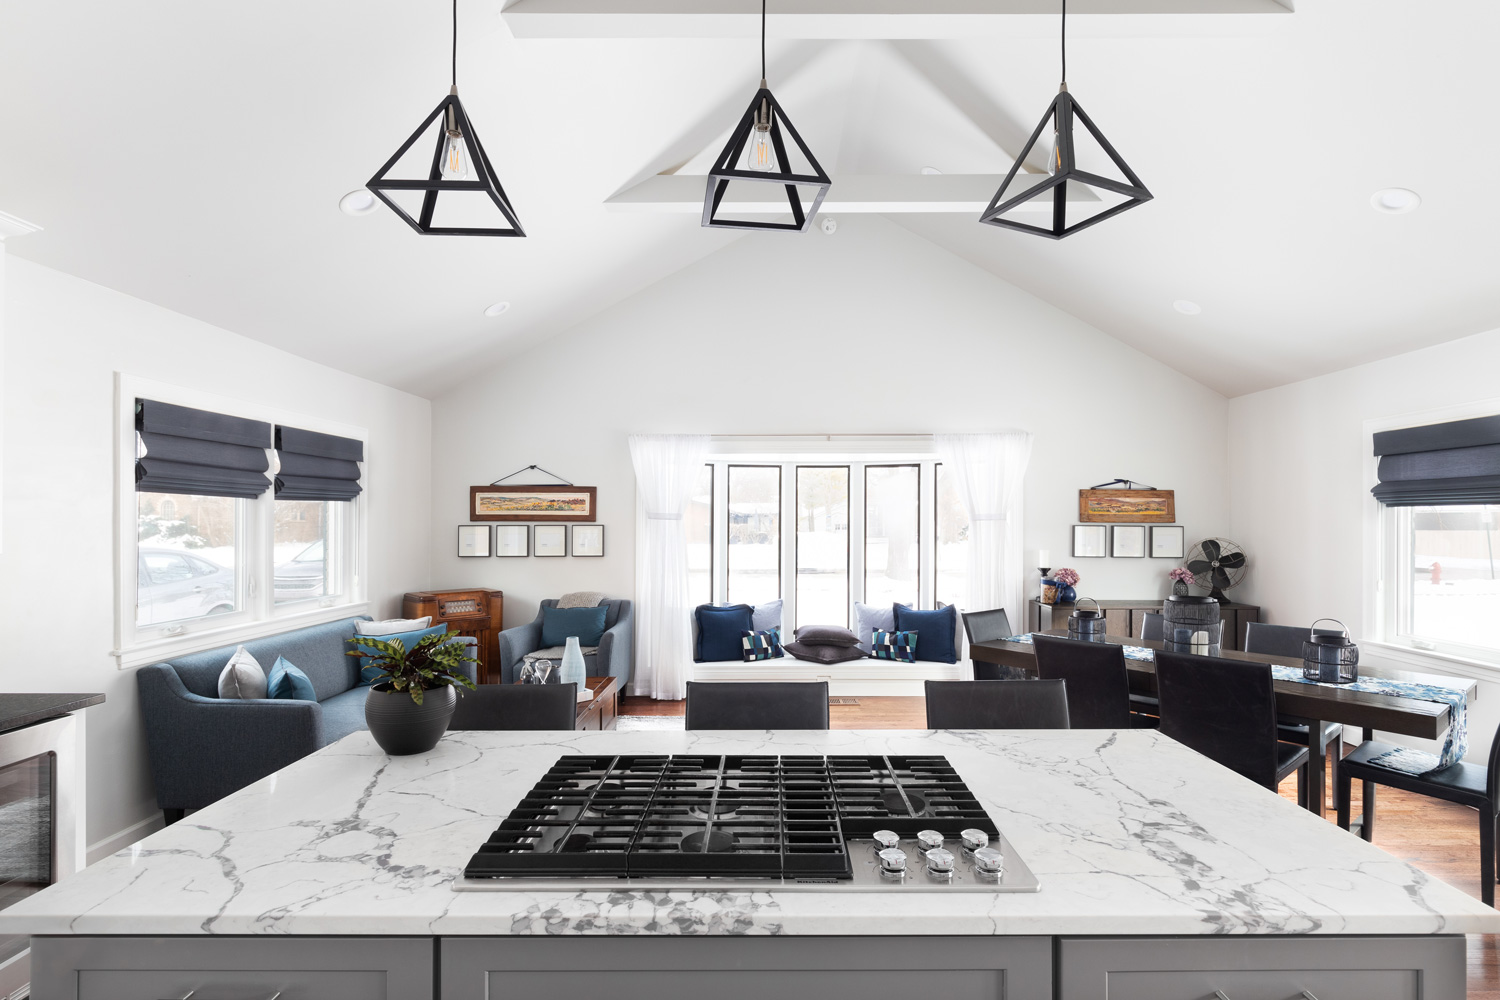 A luxury kitchen with lights hanging above the island looking towards a modern farmhouse living and dining room. White beams hang from the cathedral ceiling.